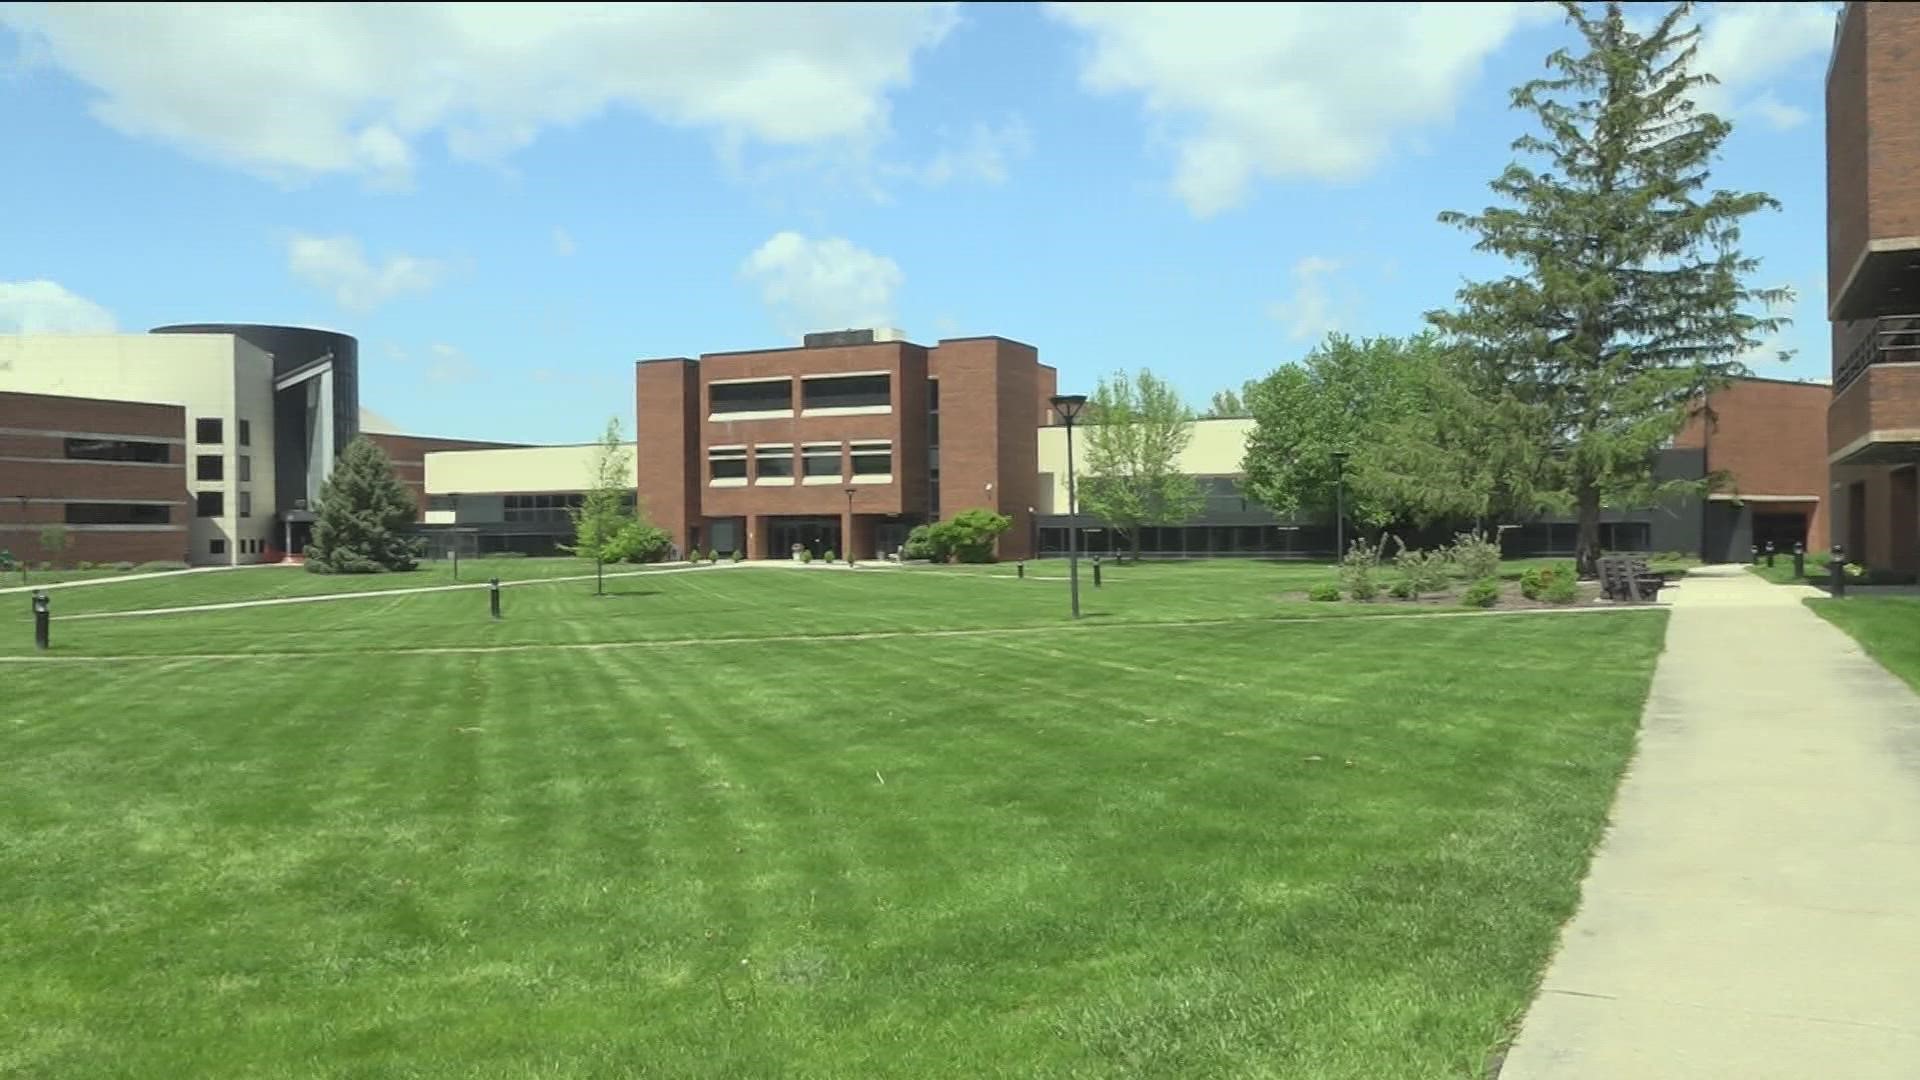 The proposed $6.6 million project would install a 1.7 megawatt solar array on campus.